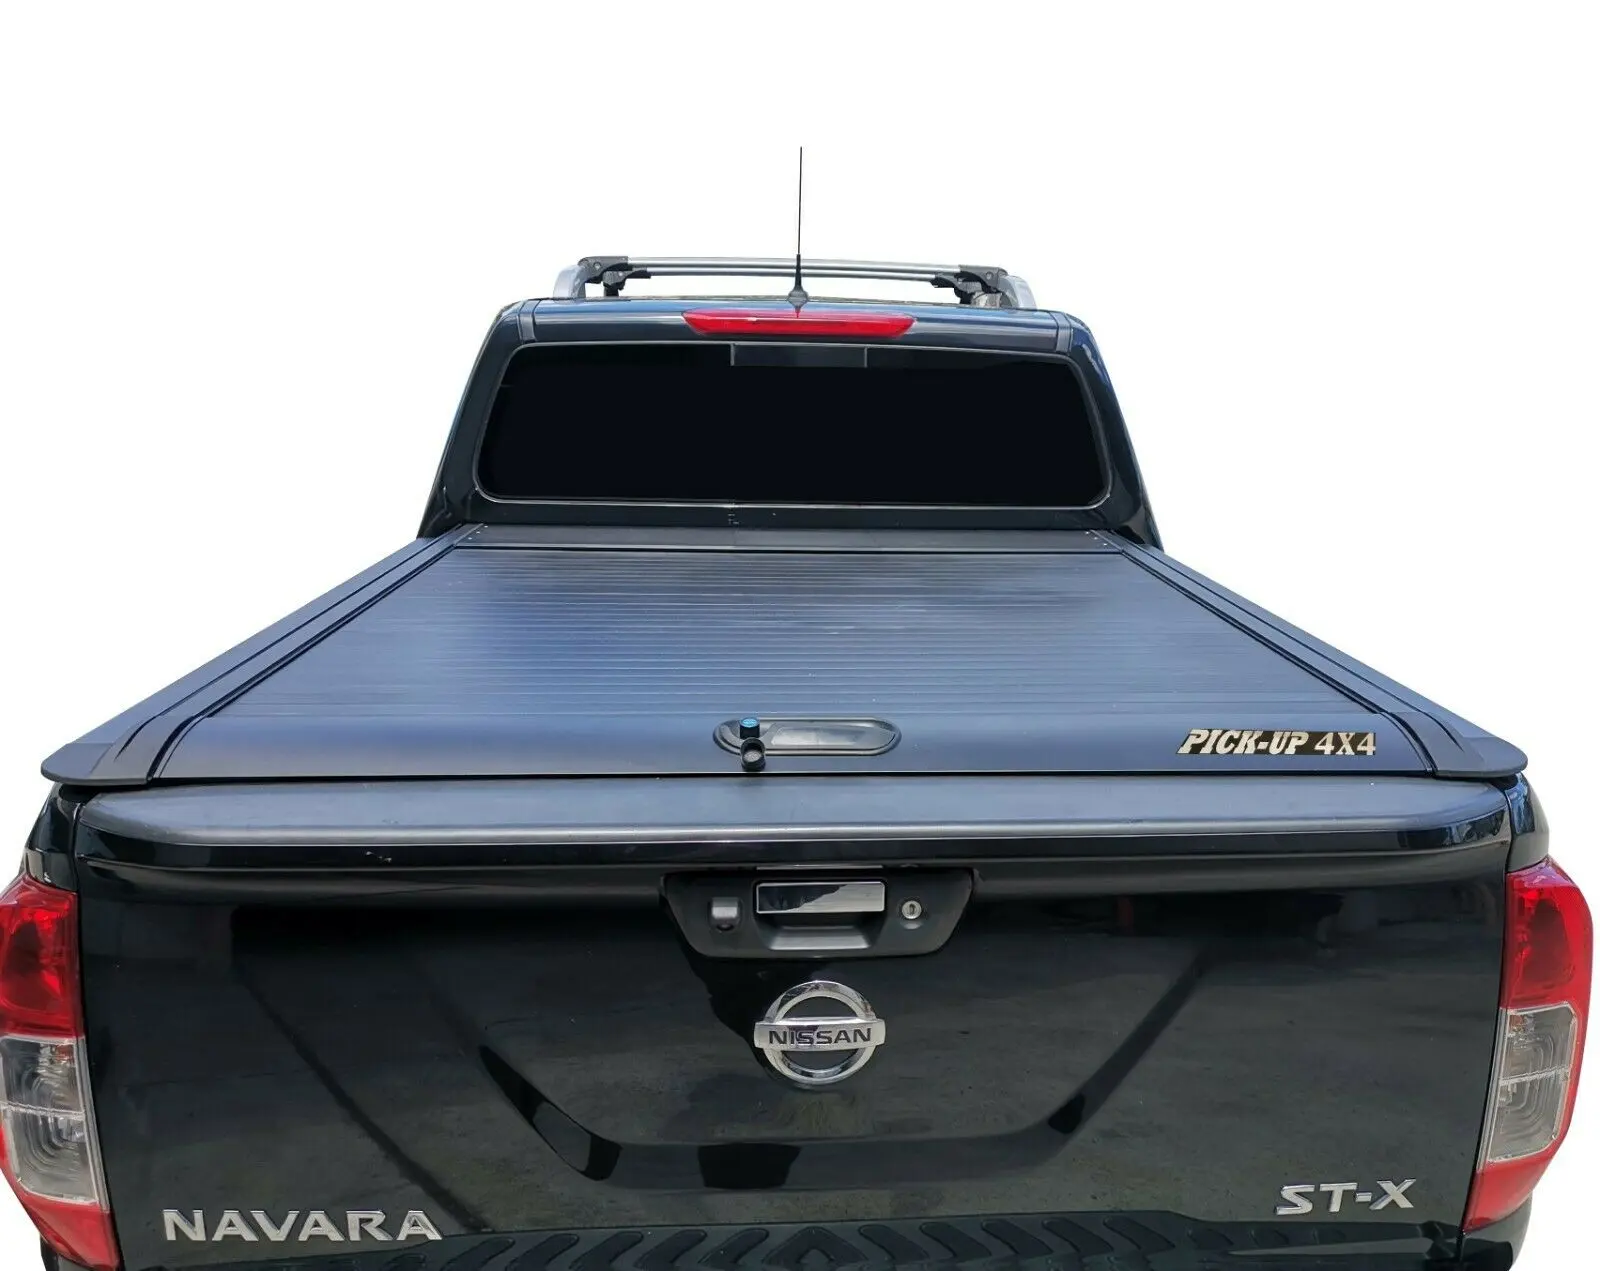 Electric Manual pickup roller shutter cover for Ford Ranger Toyota Tacoma Nissan Navara np300 D40 GWM Poer Cannon lid